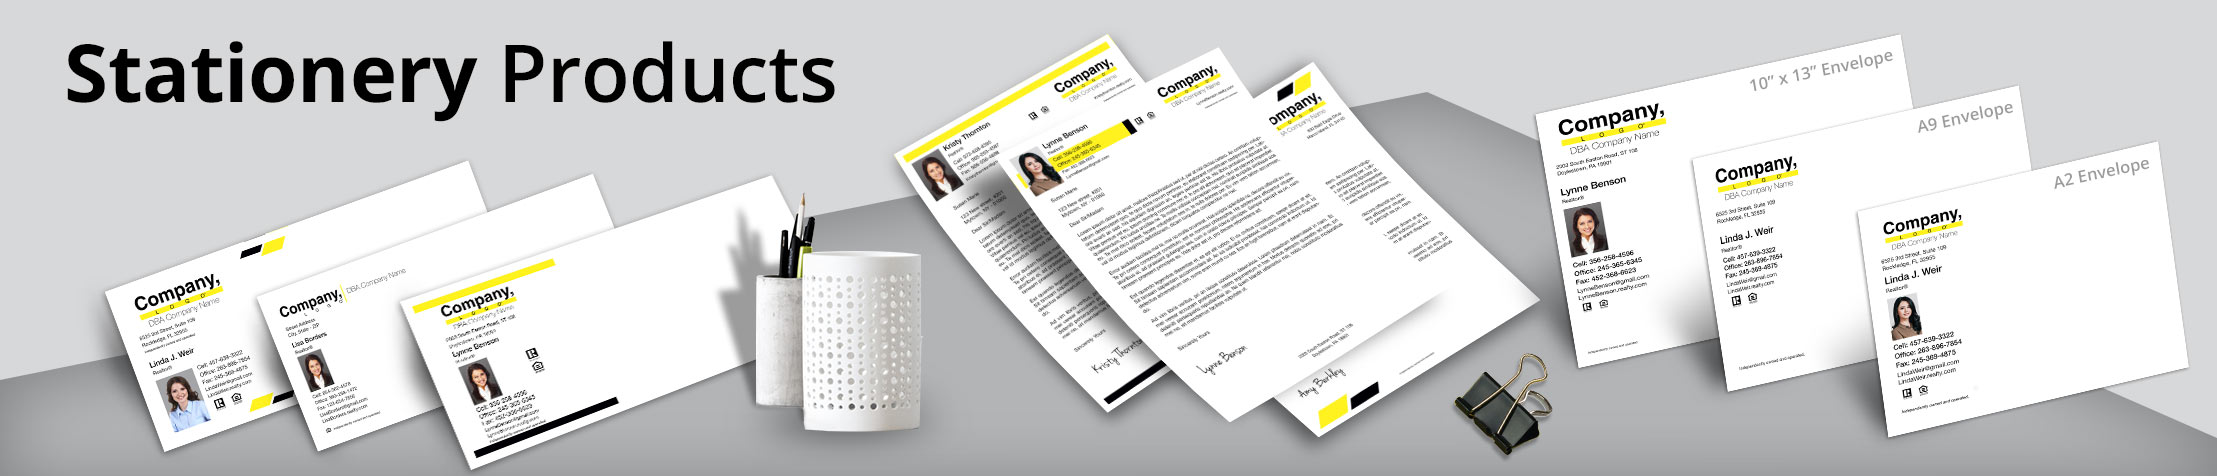 Weichert Real Estate Stationery Products - Custom Letterhead & Envelopes Stationery Products for Realtors | BestPrintBuy.com